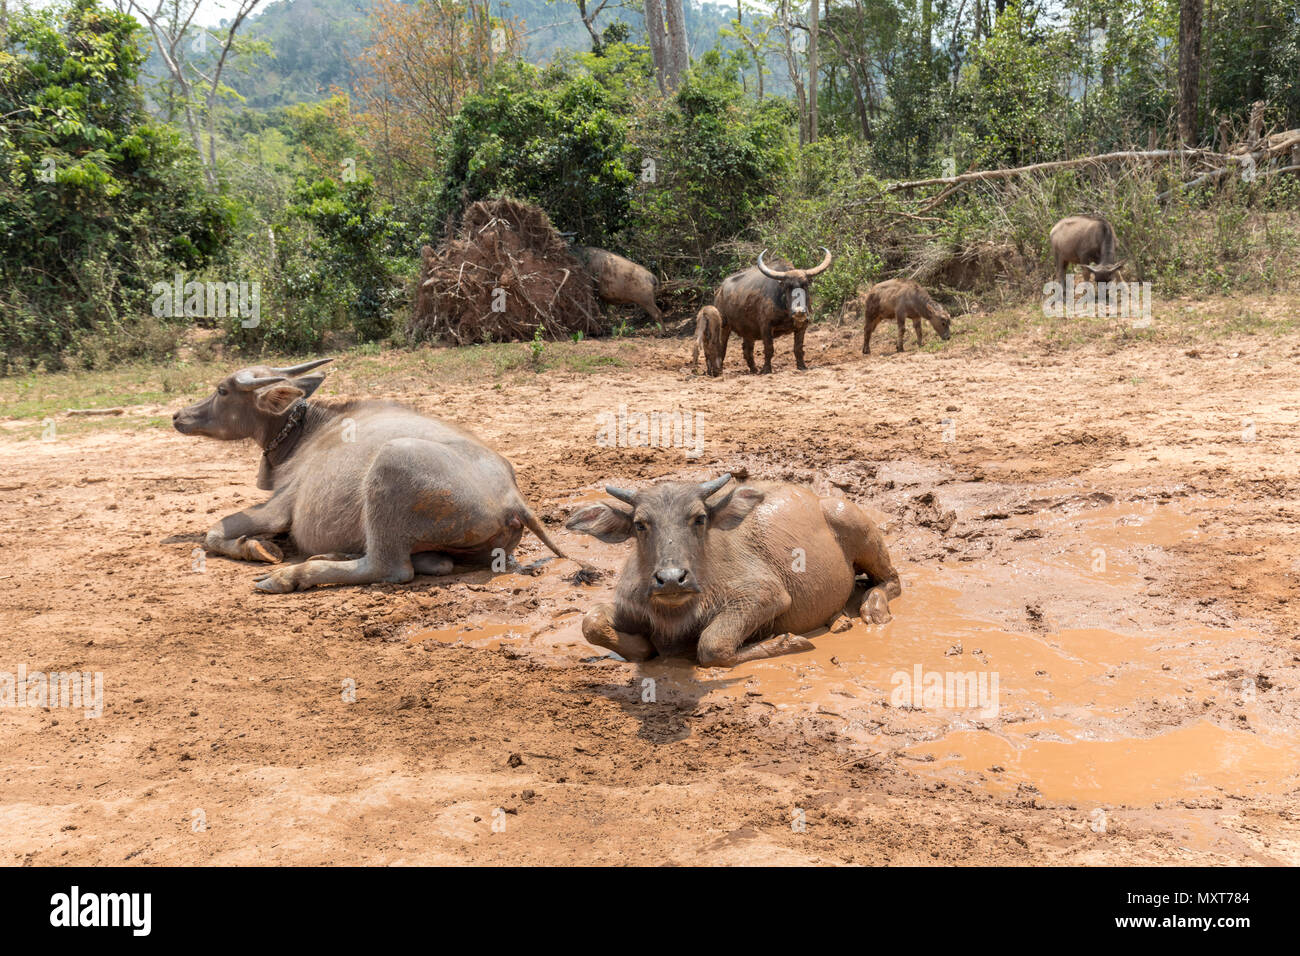 Cattle wallowing in mud in road, Boulapha, Laos Stock Photo